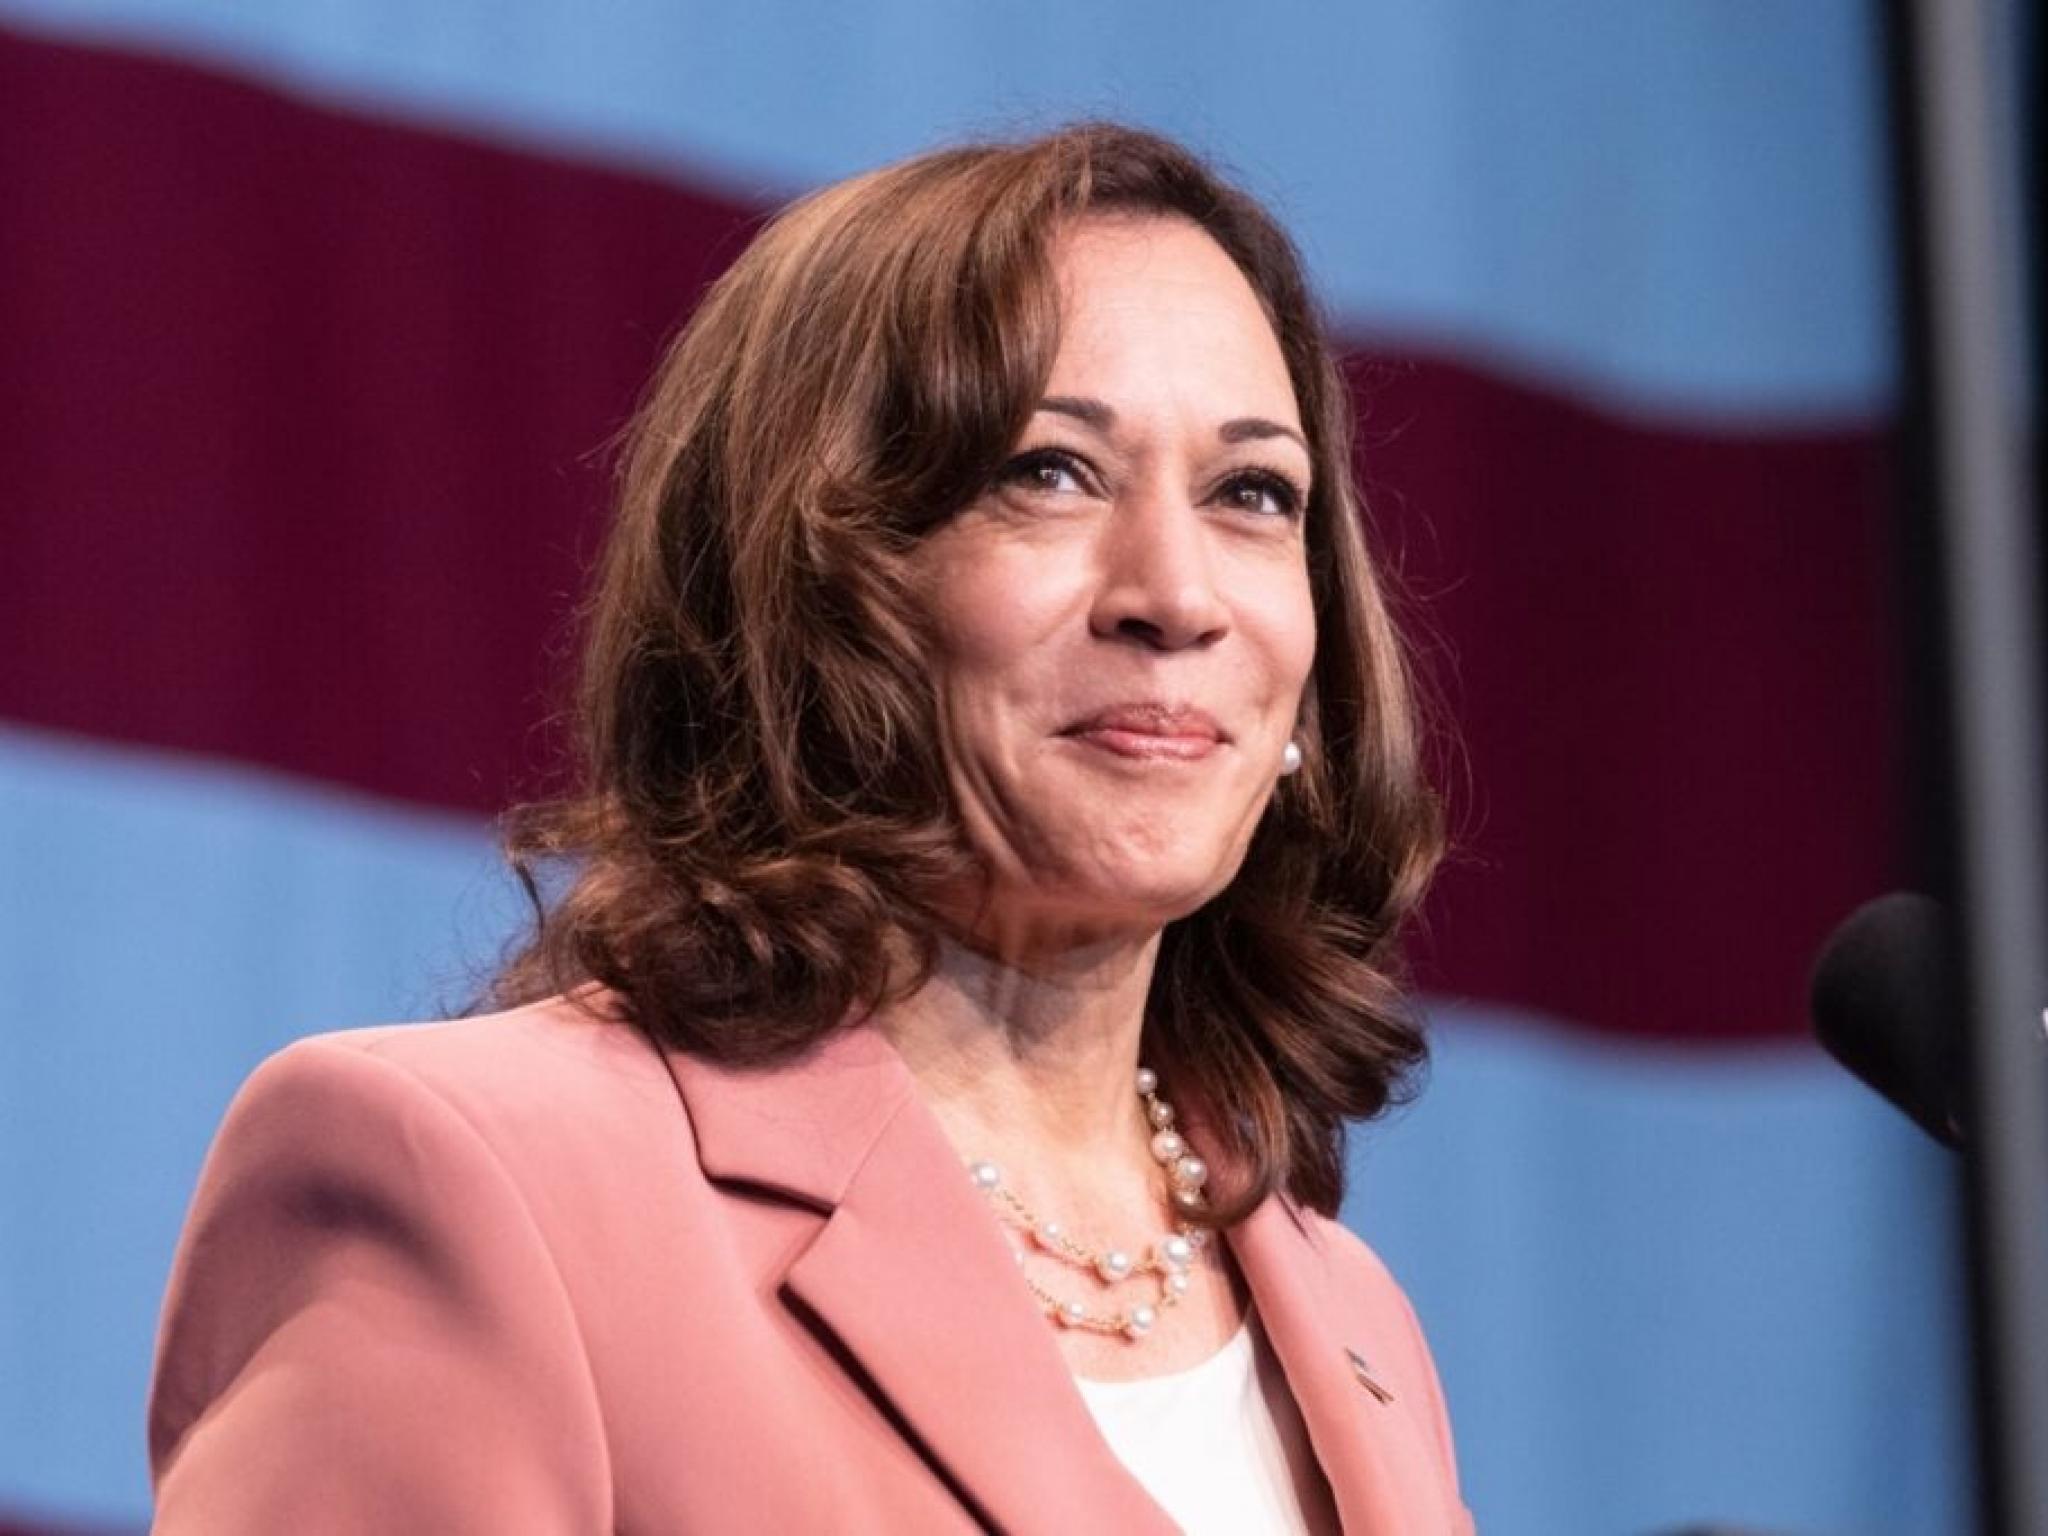  trump-era-white-house-official-anthony-scaramucci-says-kamala-harris-is-capable-and-has-a-great-team-look-forward-to-seeing-her-policies-on-crypto 